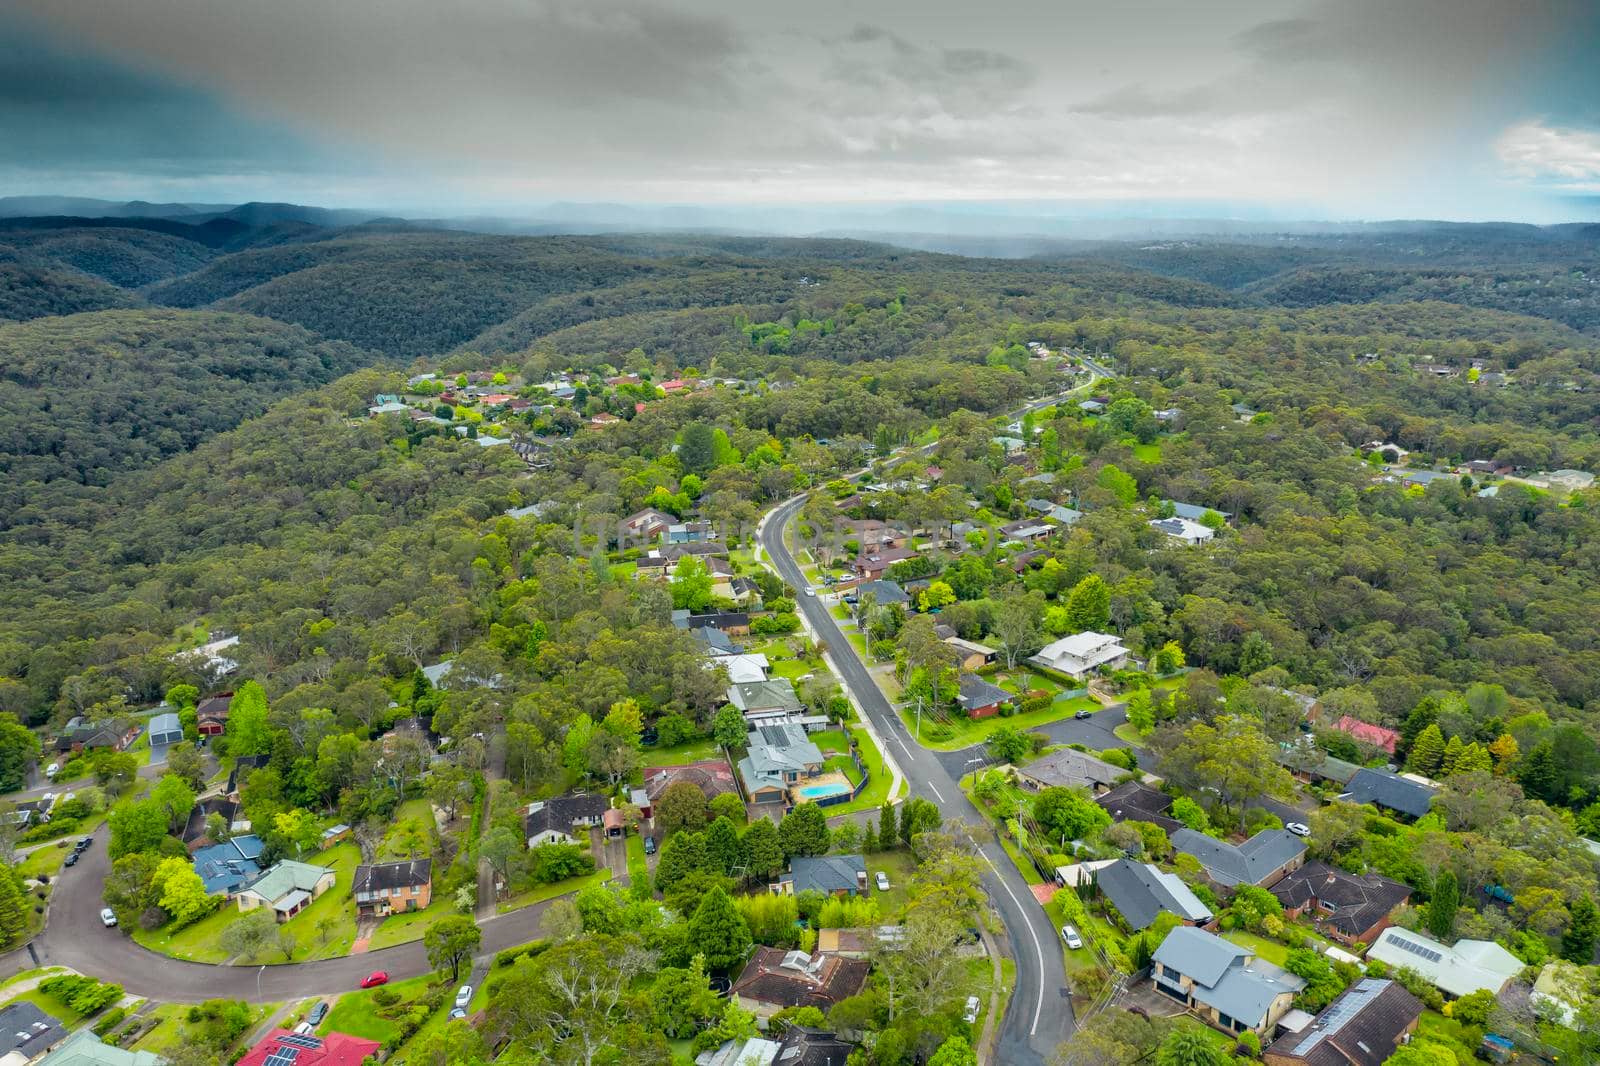 Aerial view of the township of Faulconbridge in The Blue Mountains in regional New South Wales in Australia